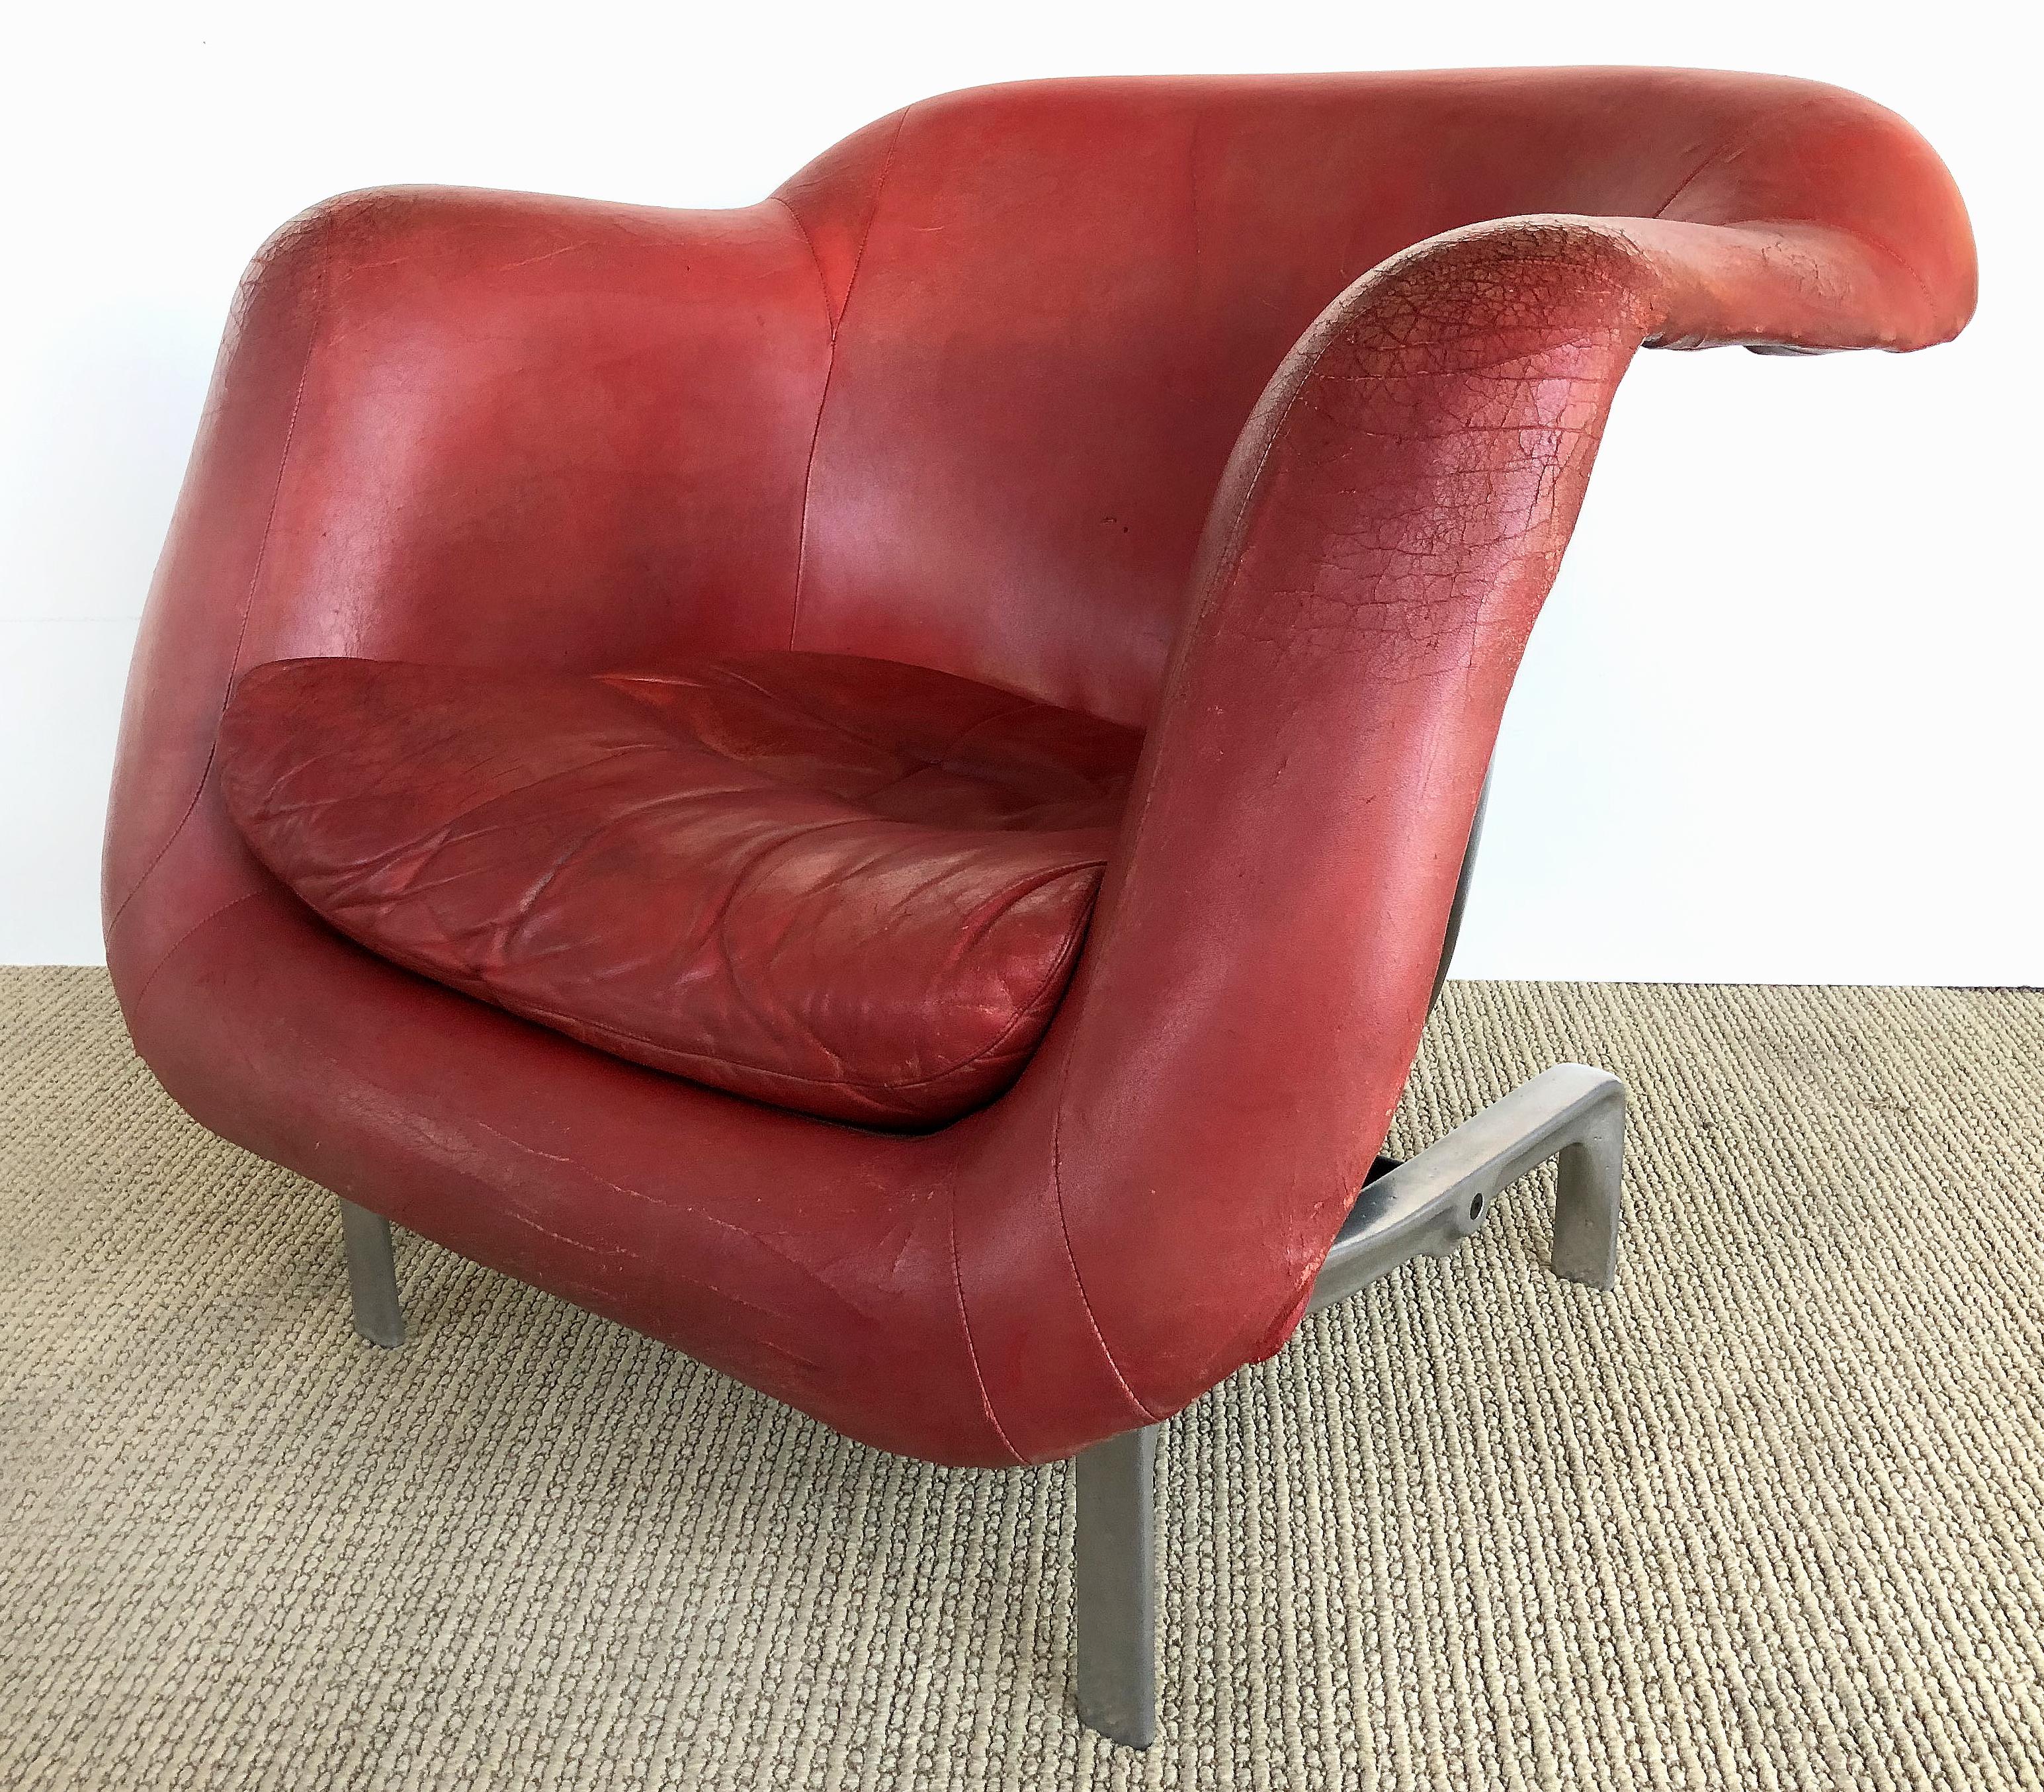 Yrjo Kukkapuro 1960s Prototype club chair, Finland

Offered for sale is a rare find! This is a 1960s prototype chair by the Finish Architect and designer Yrjo Kukkapuro that was never put into production. This exquisite chair was done in a dark